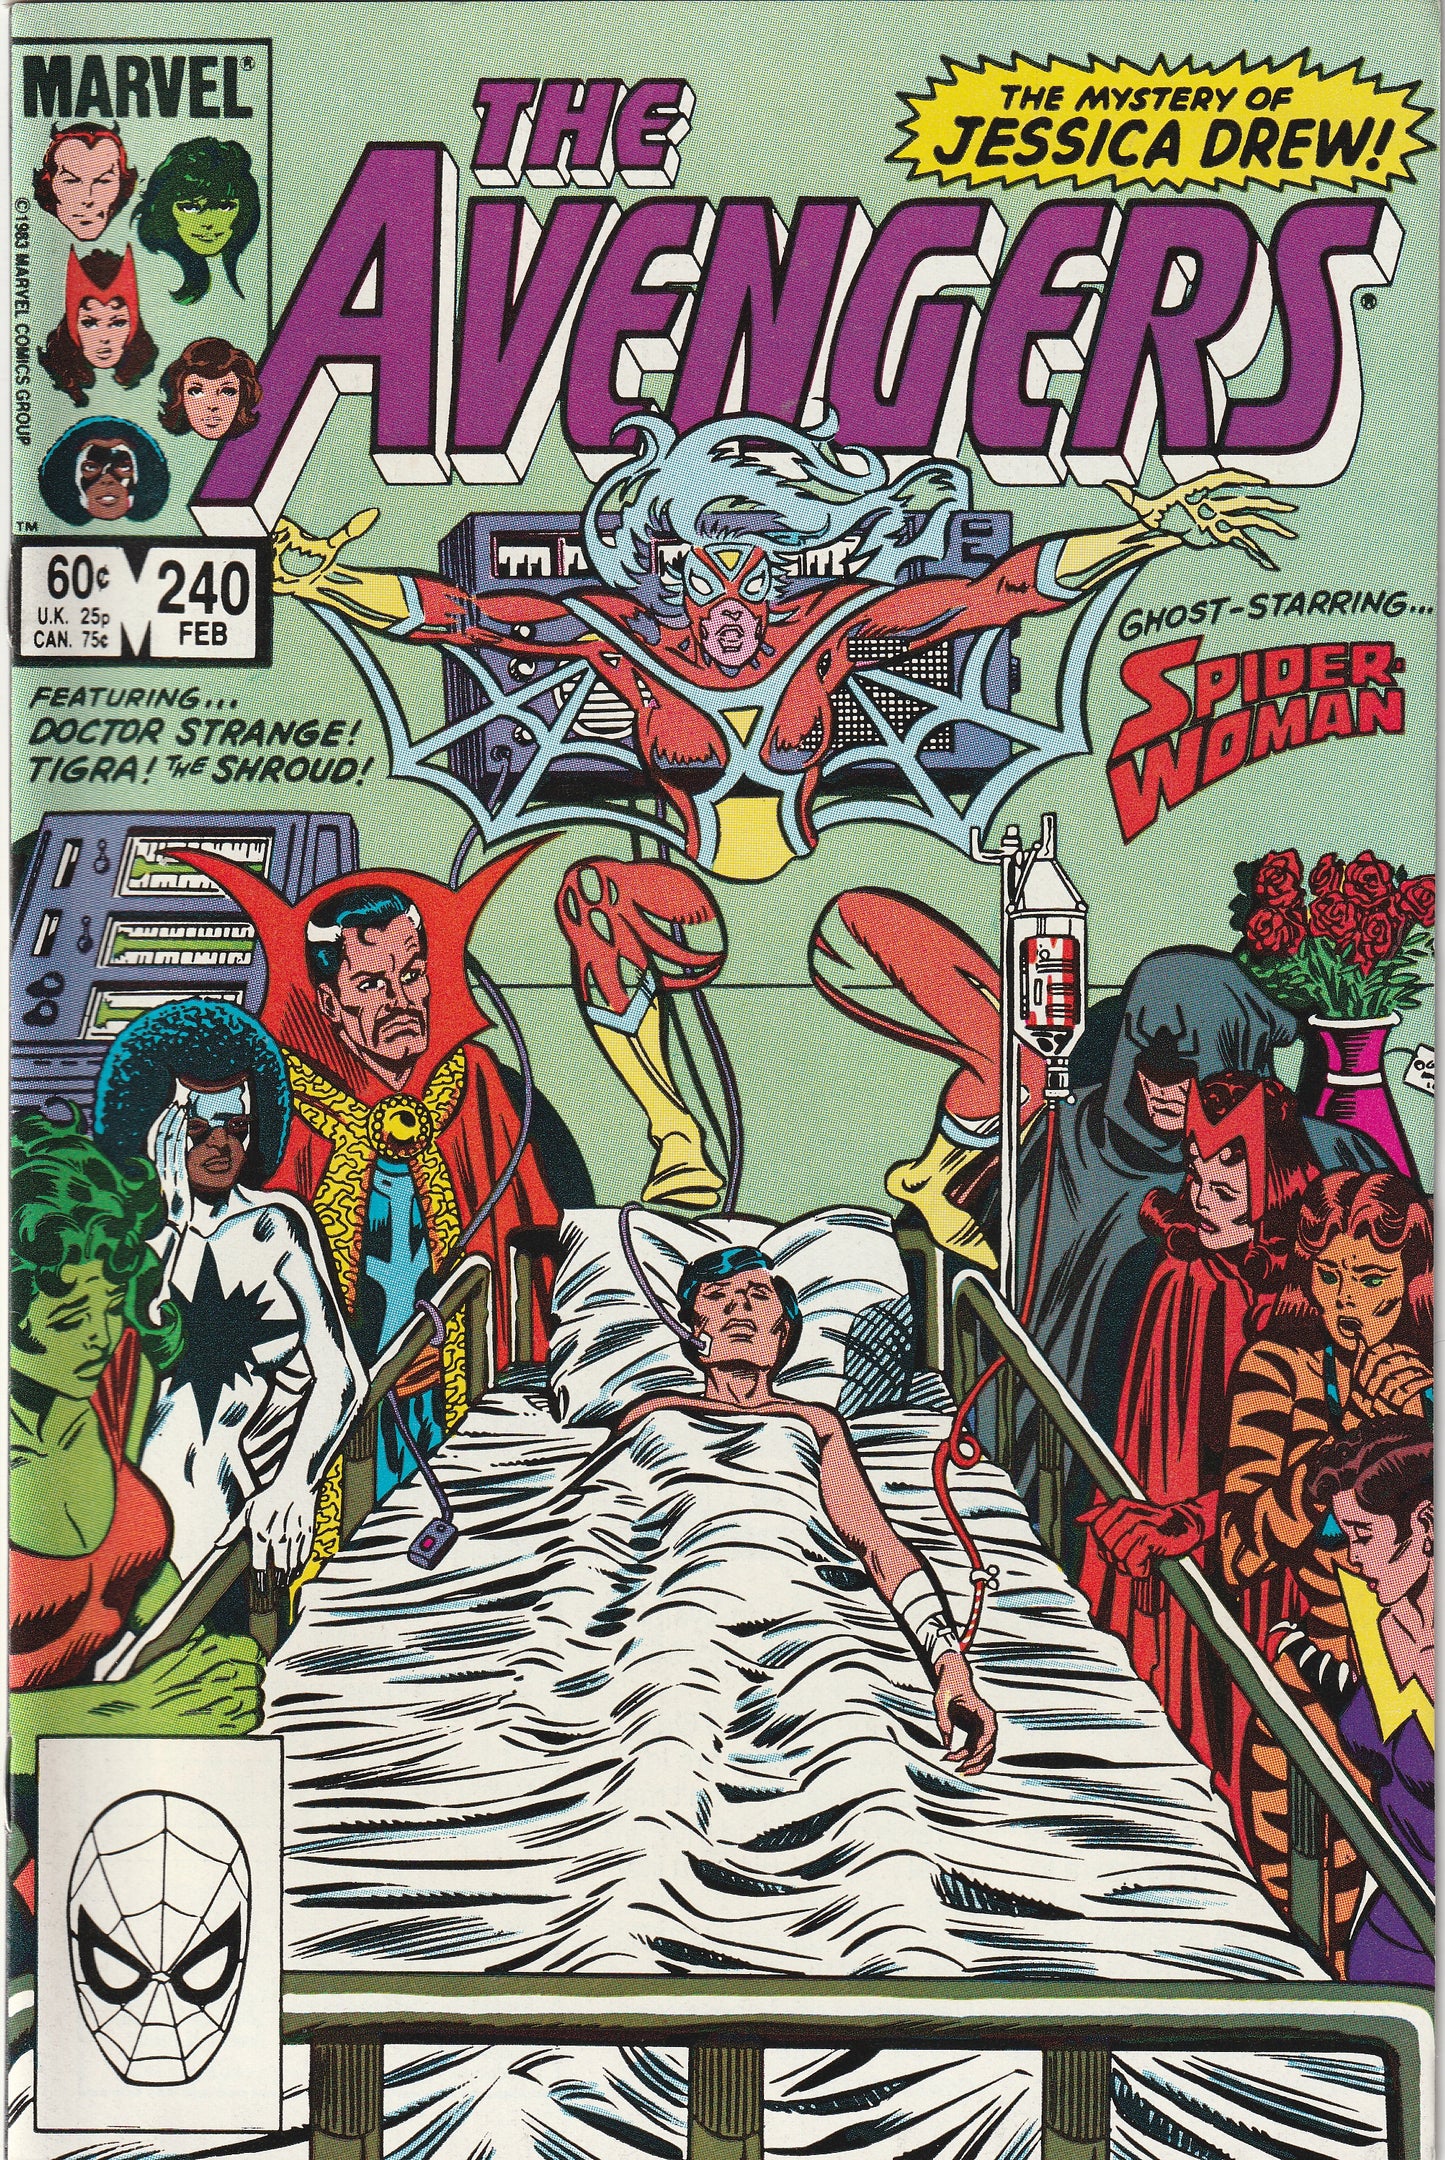 Avengers #240 (1984) - Spider-Woman revived